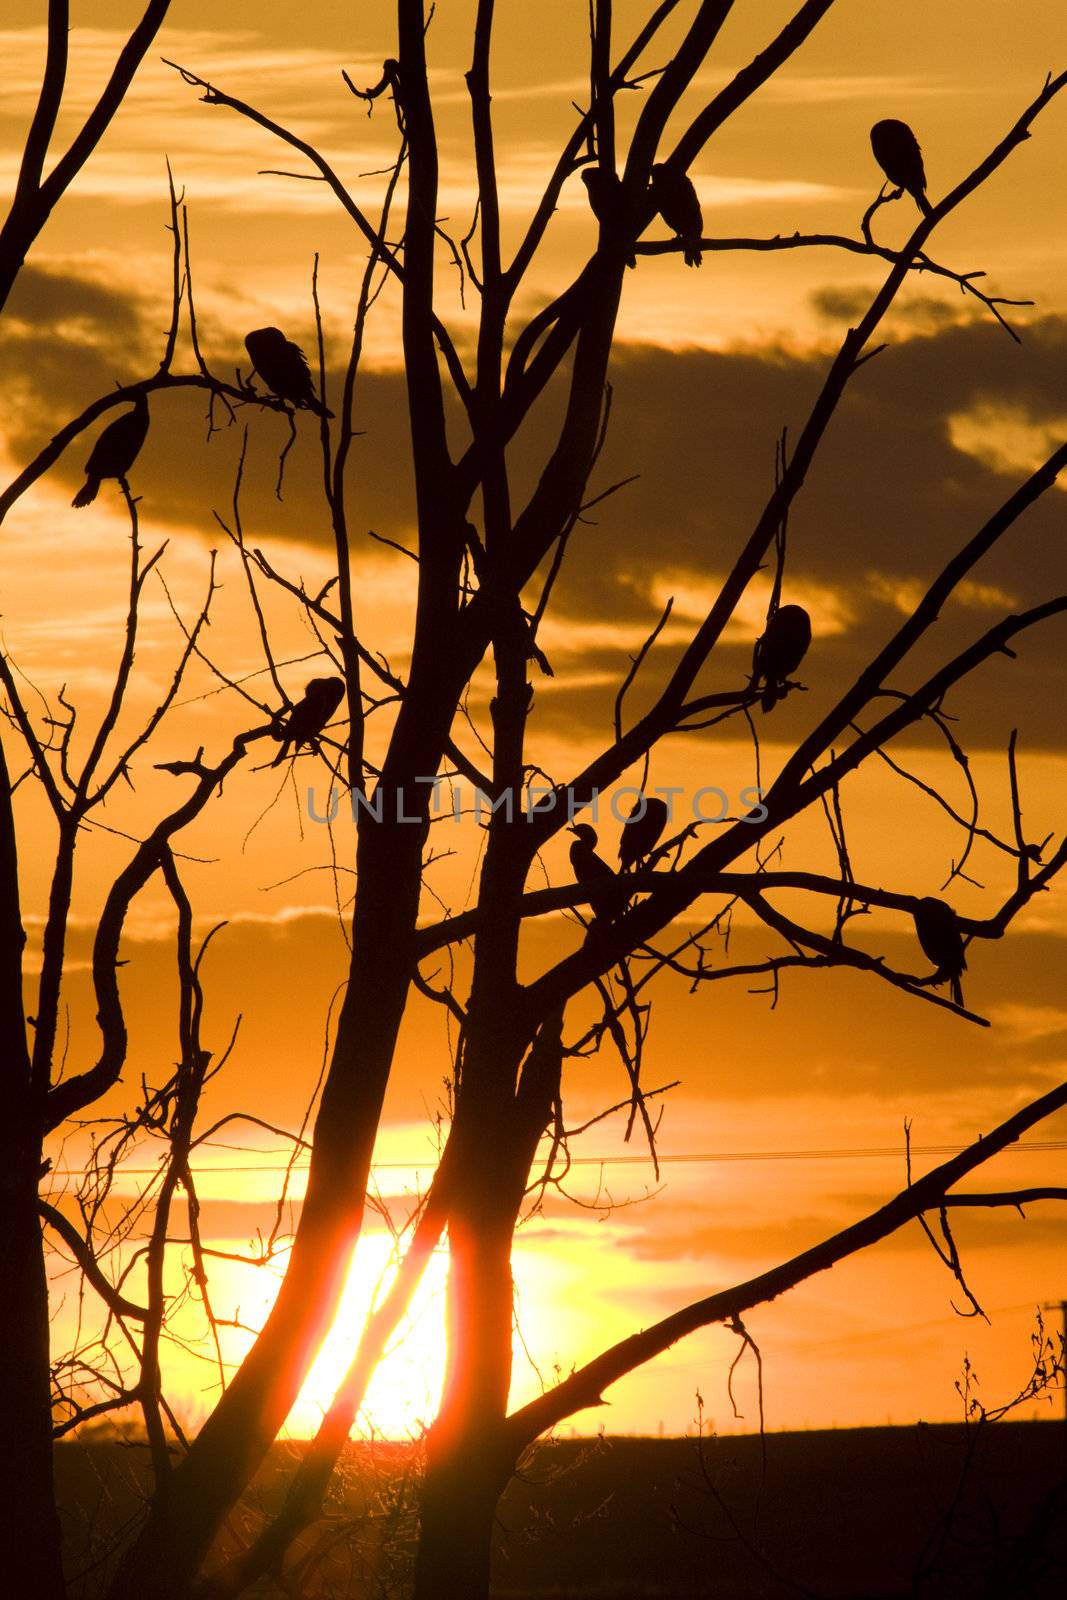 Cormorants in Tree at Sunset by pictureguy